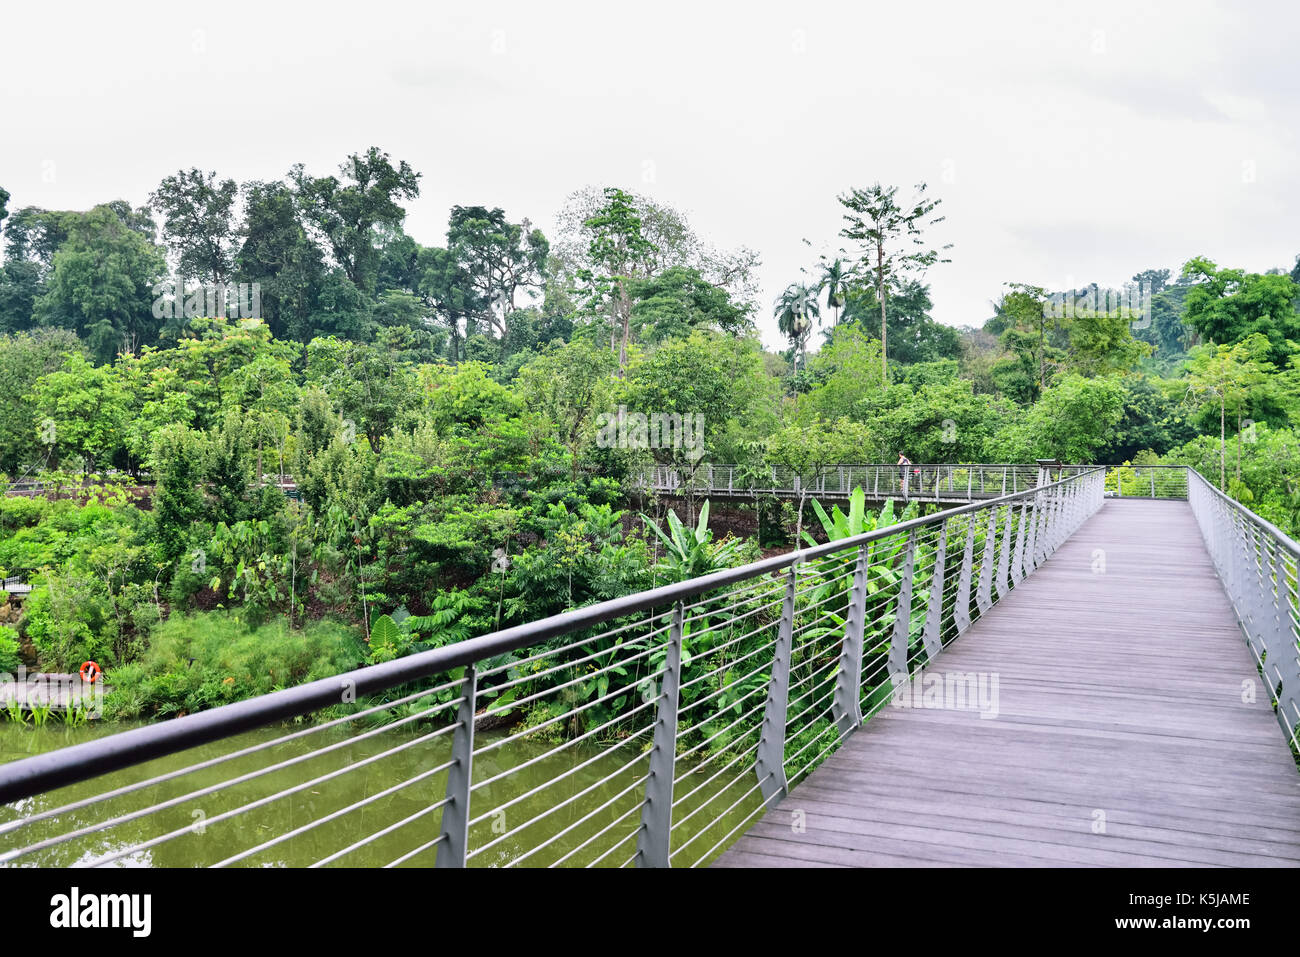 In the morning, a man jogs on the bridge and walkway over the wetlands section of the Singapore Botanic Gardens. Greenery and tropical trees abound. Stock Photo